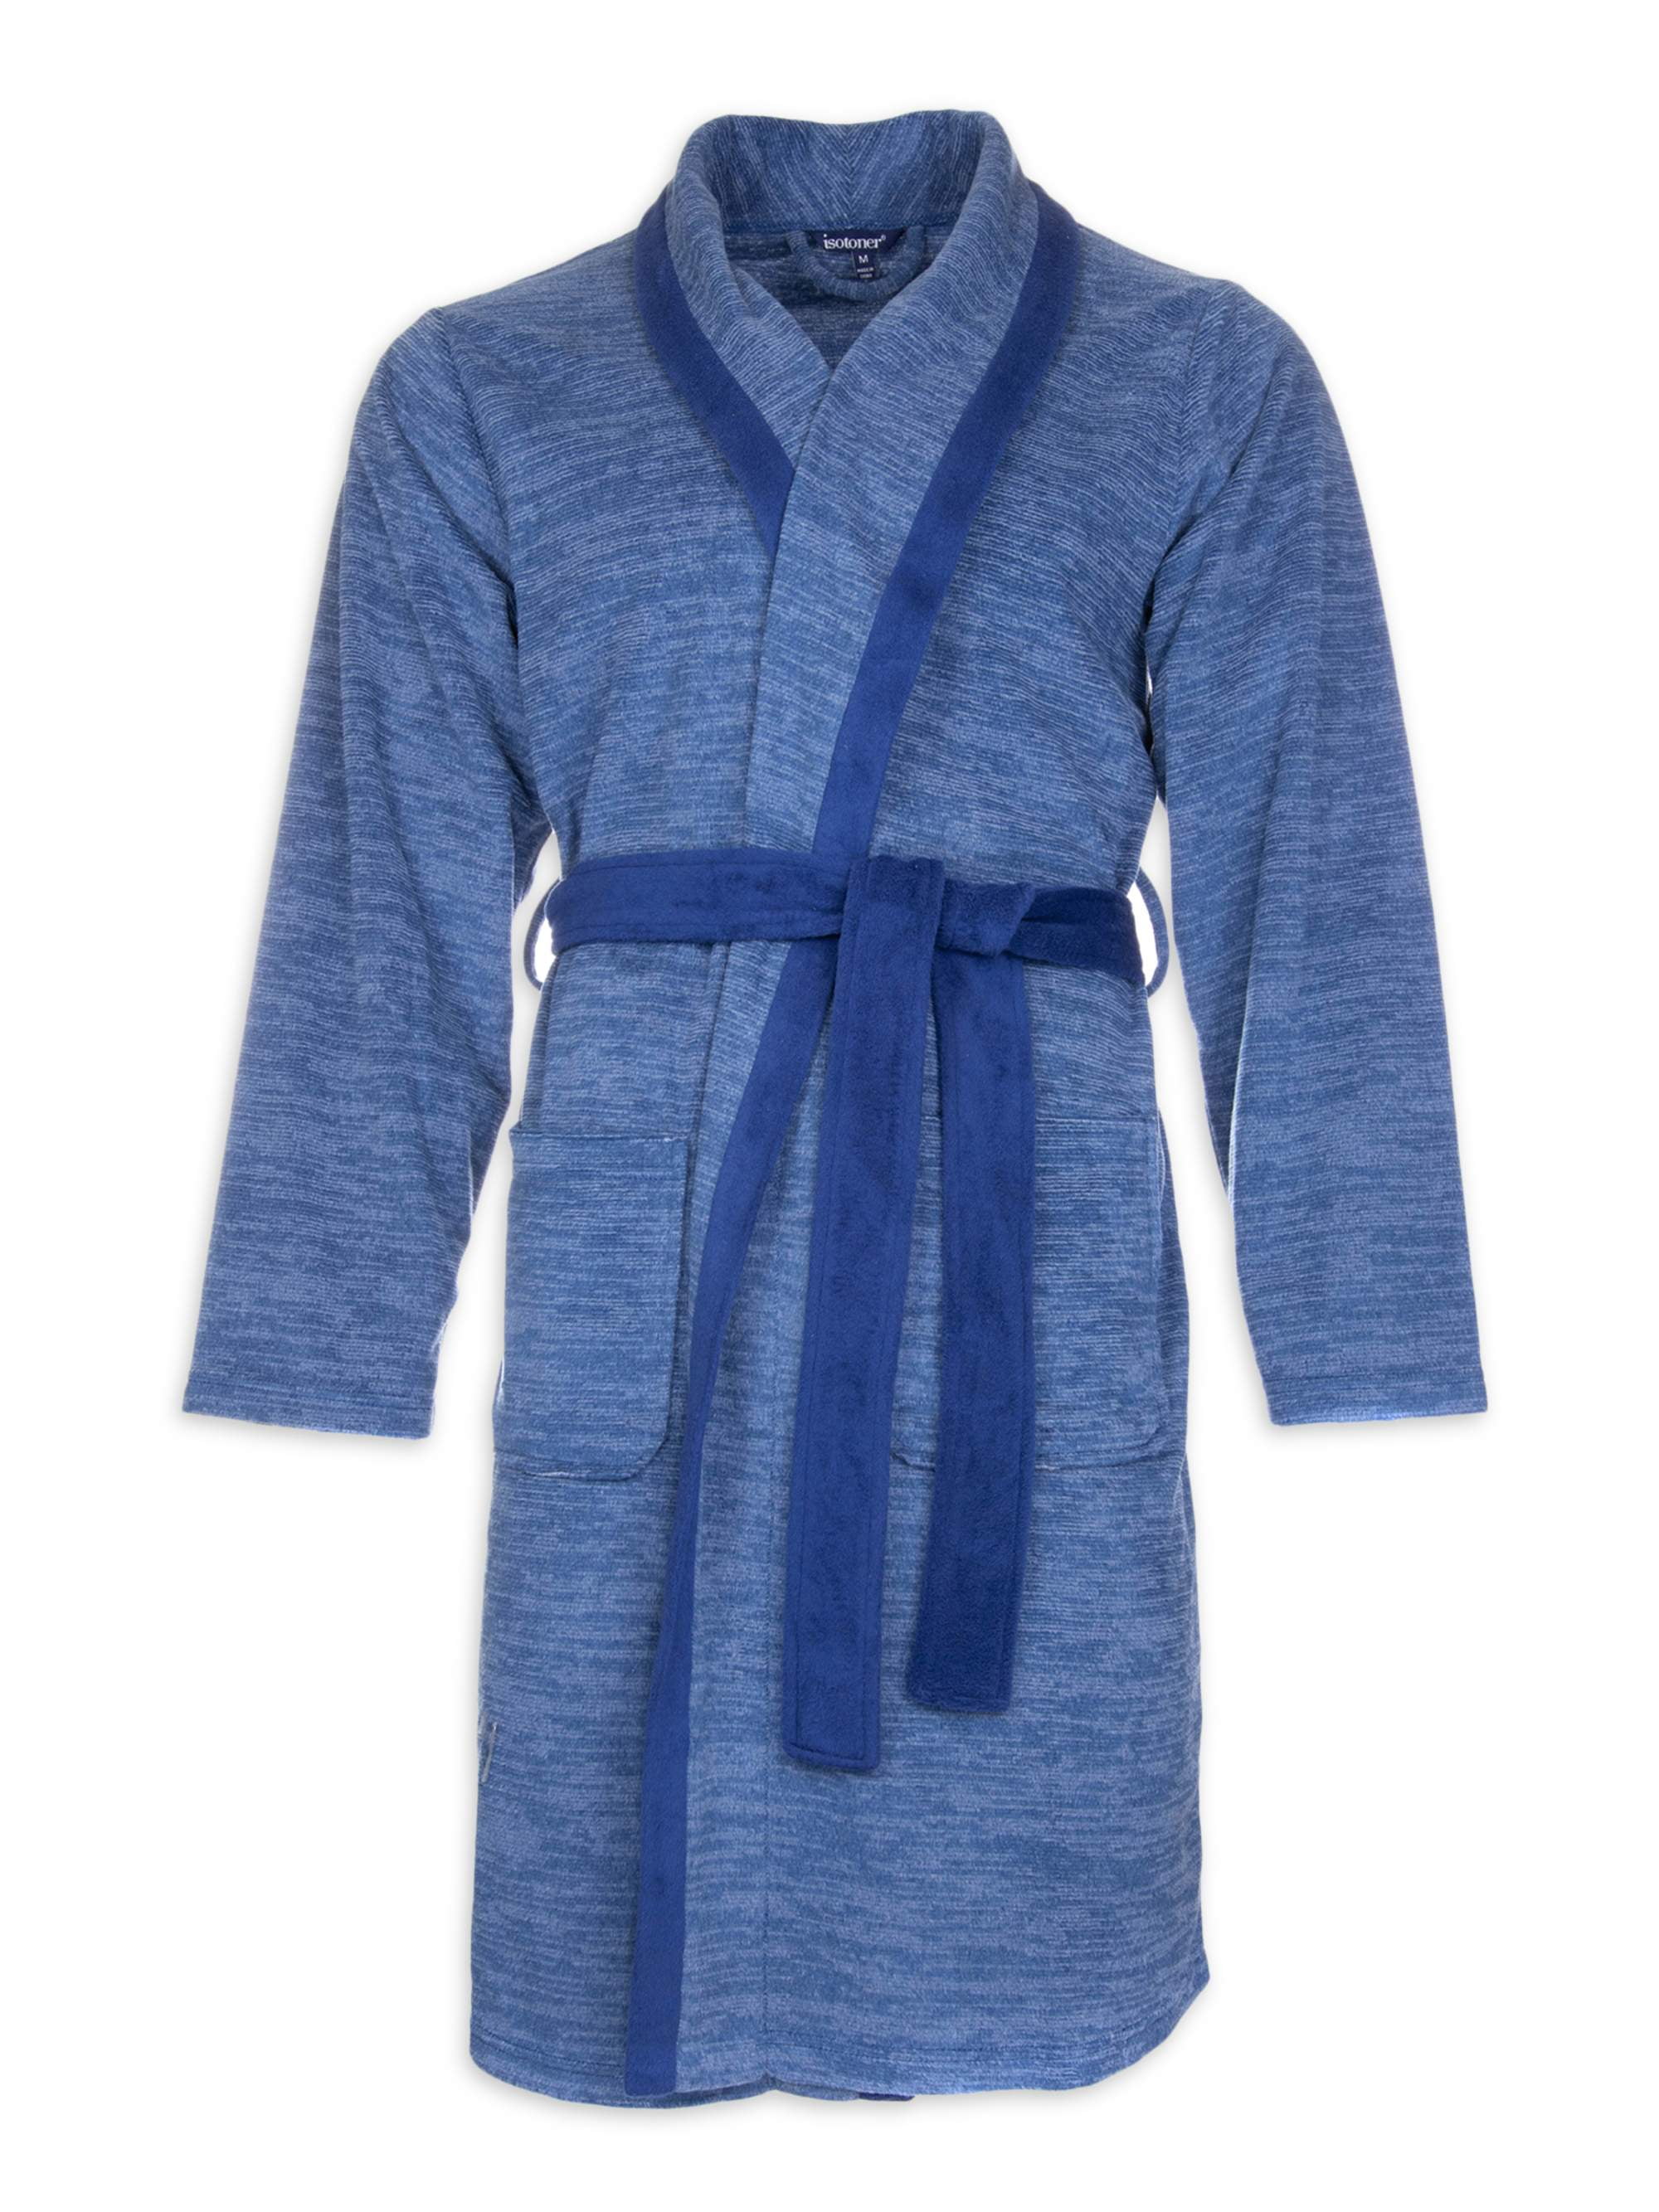 Blue Arena Dressing Gown Or Bathrobe in Slate Blue Mens Clothing Nightwear and sleepwear Robes and bathrobes for Men 